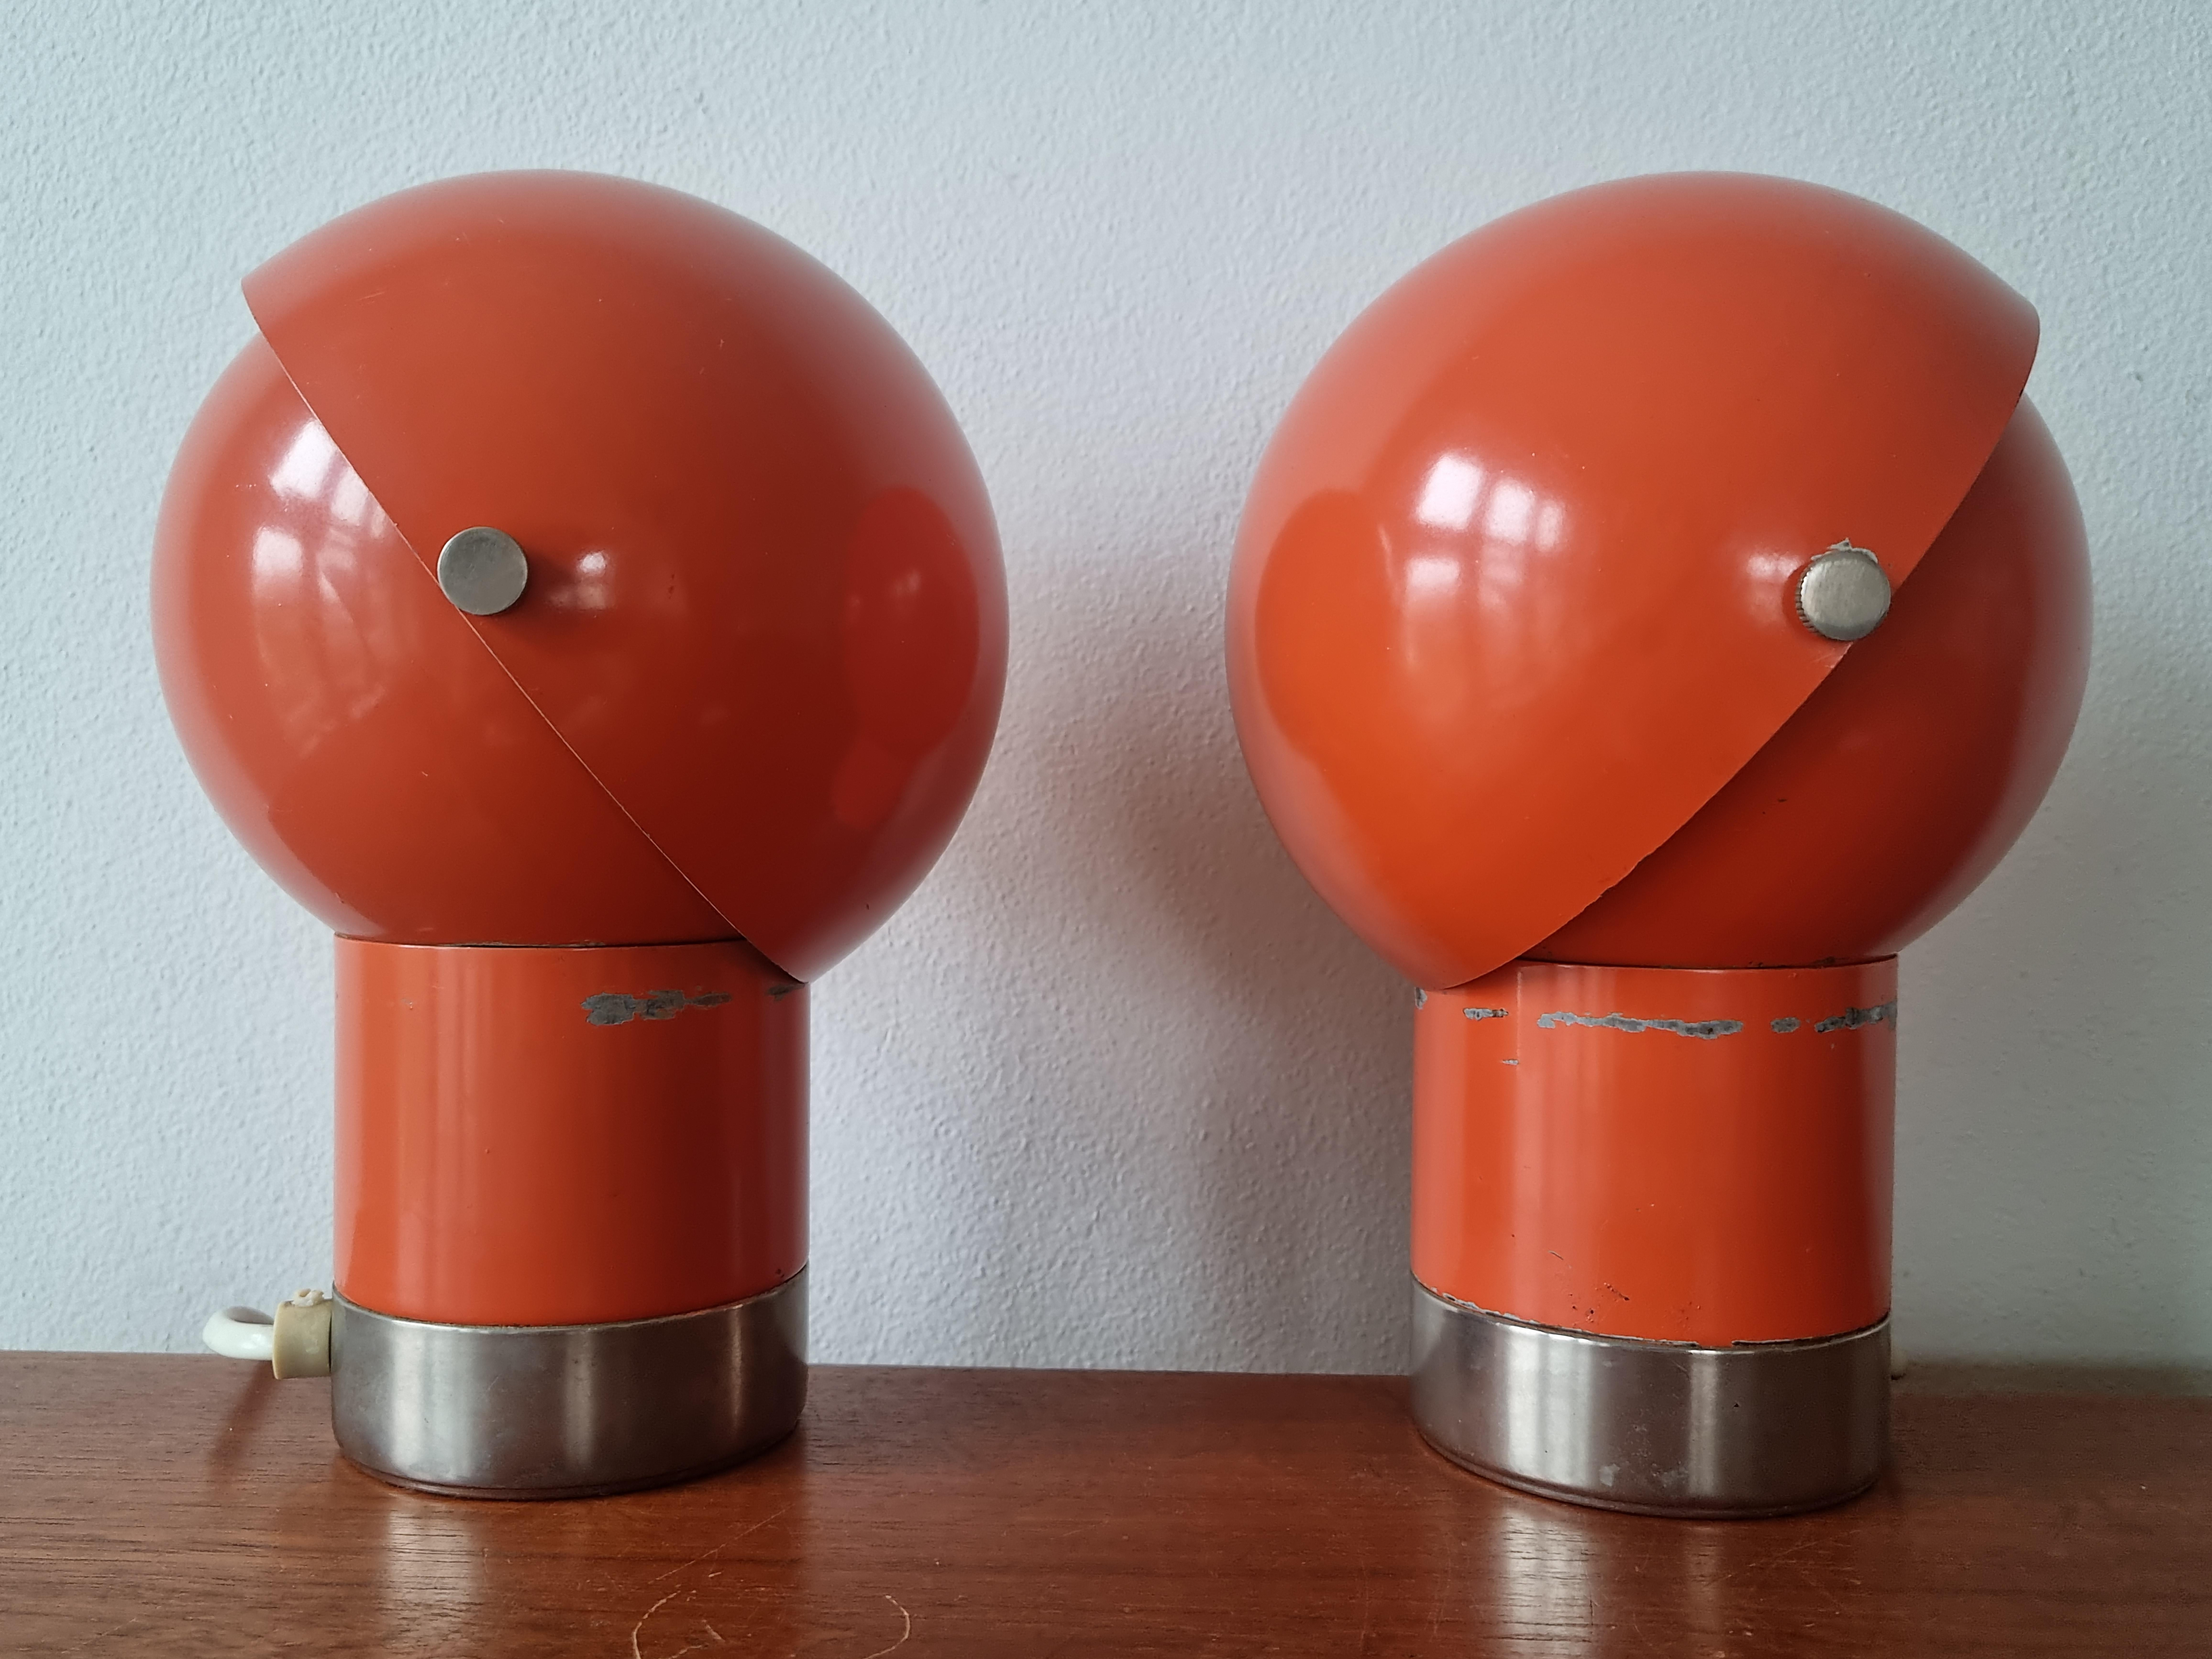 Pair of Mid-Century Table Lamps Designed by Pavel Grus, Kamenicky Senov, 1960s In Good Condition For Sale In Praha, CZ